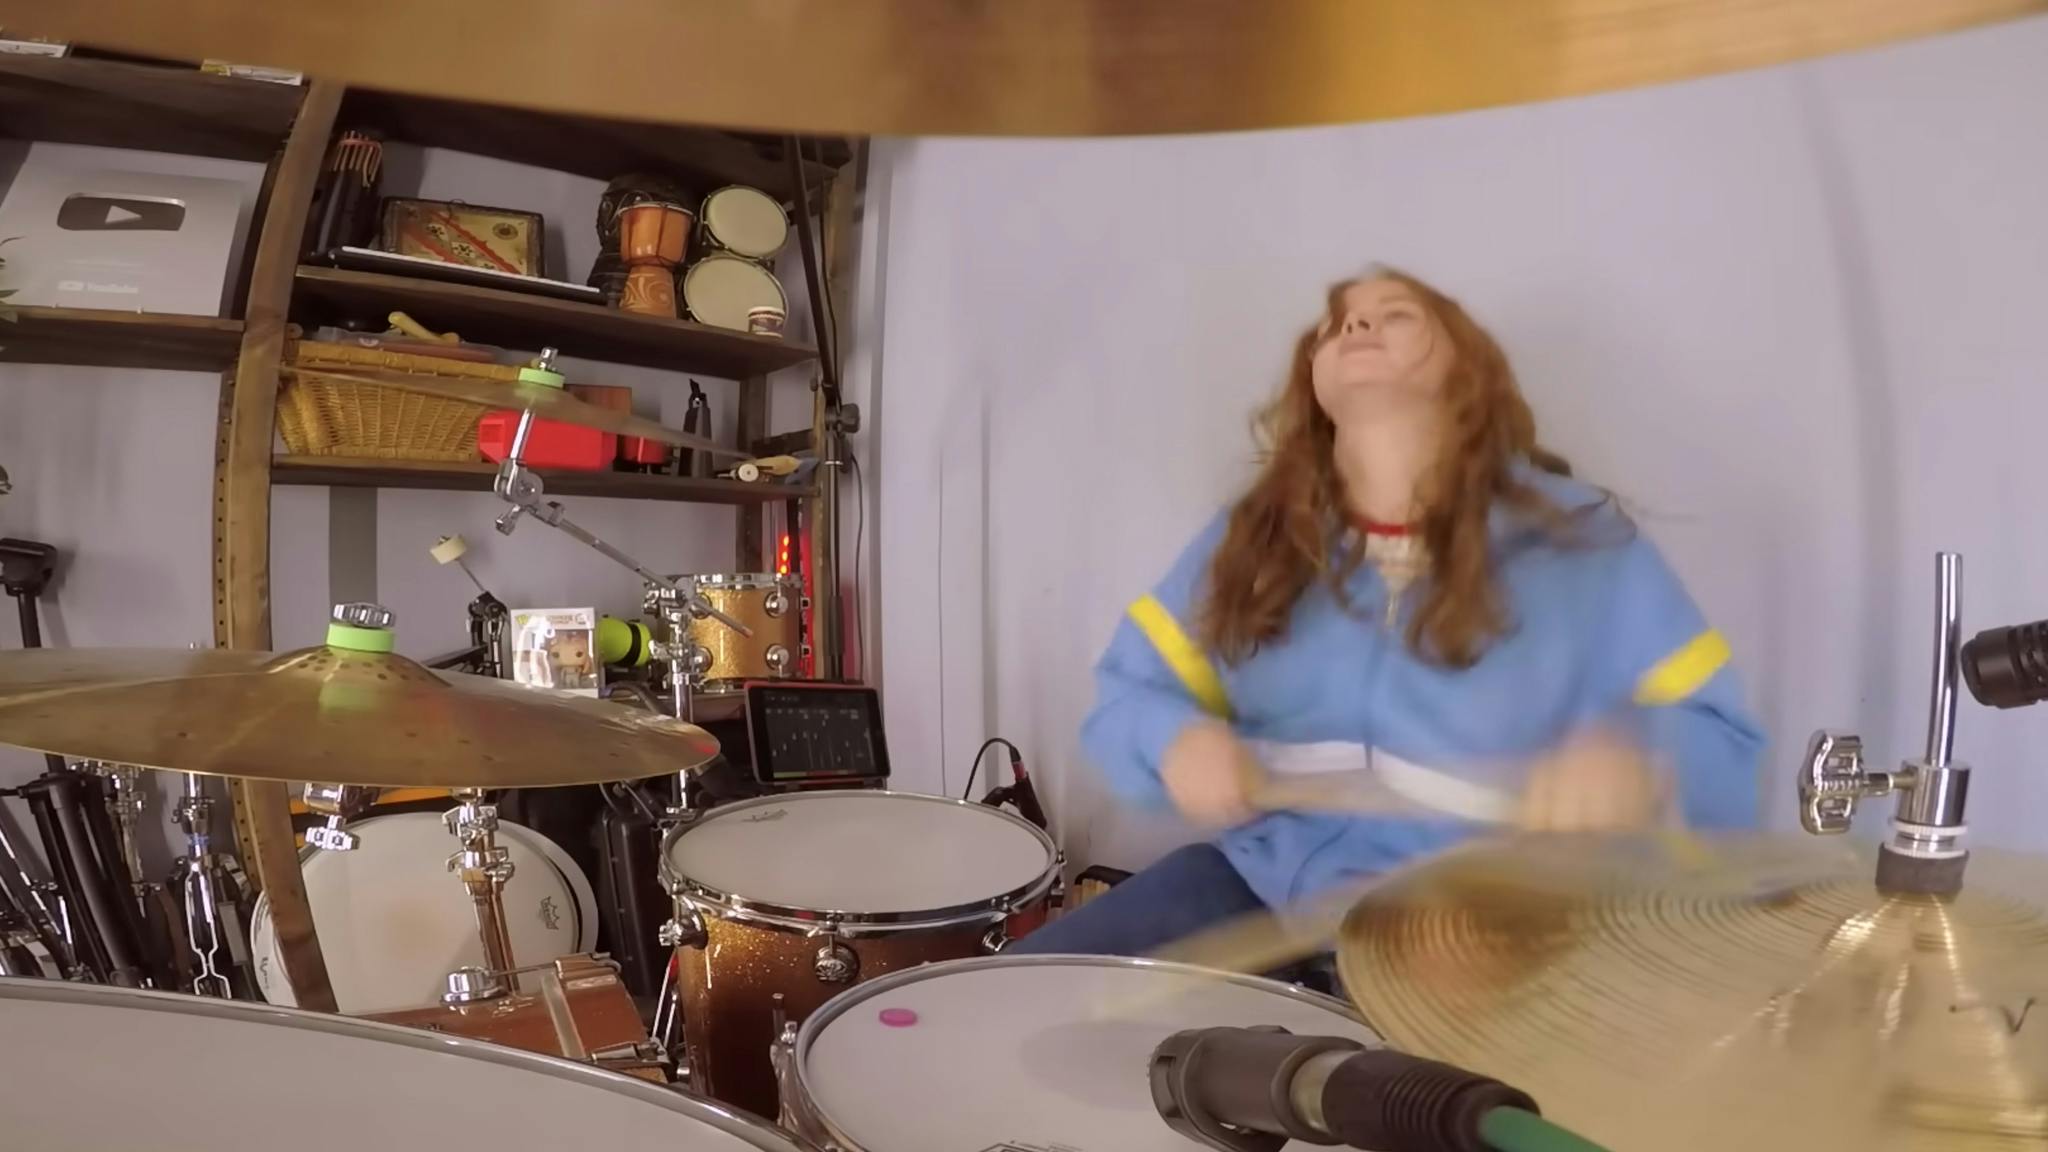 Watch: Max Mayfield lookalike covers Master Of Puppets on the drums